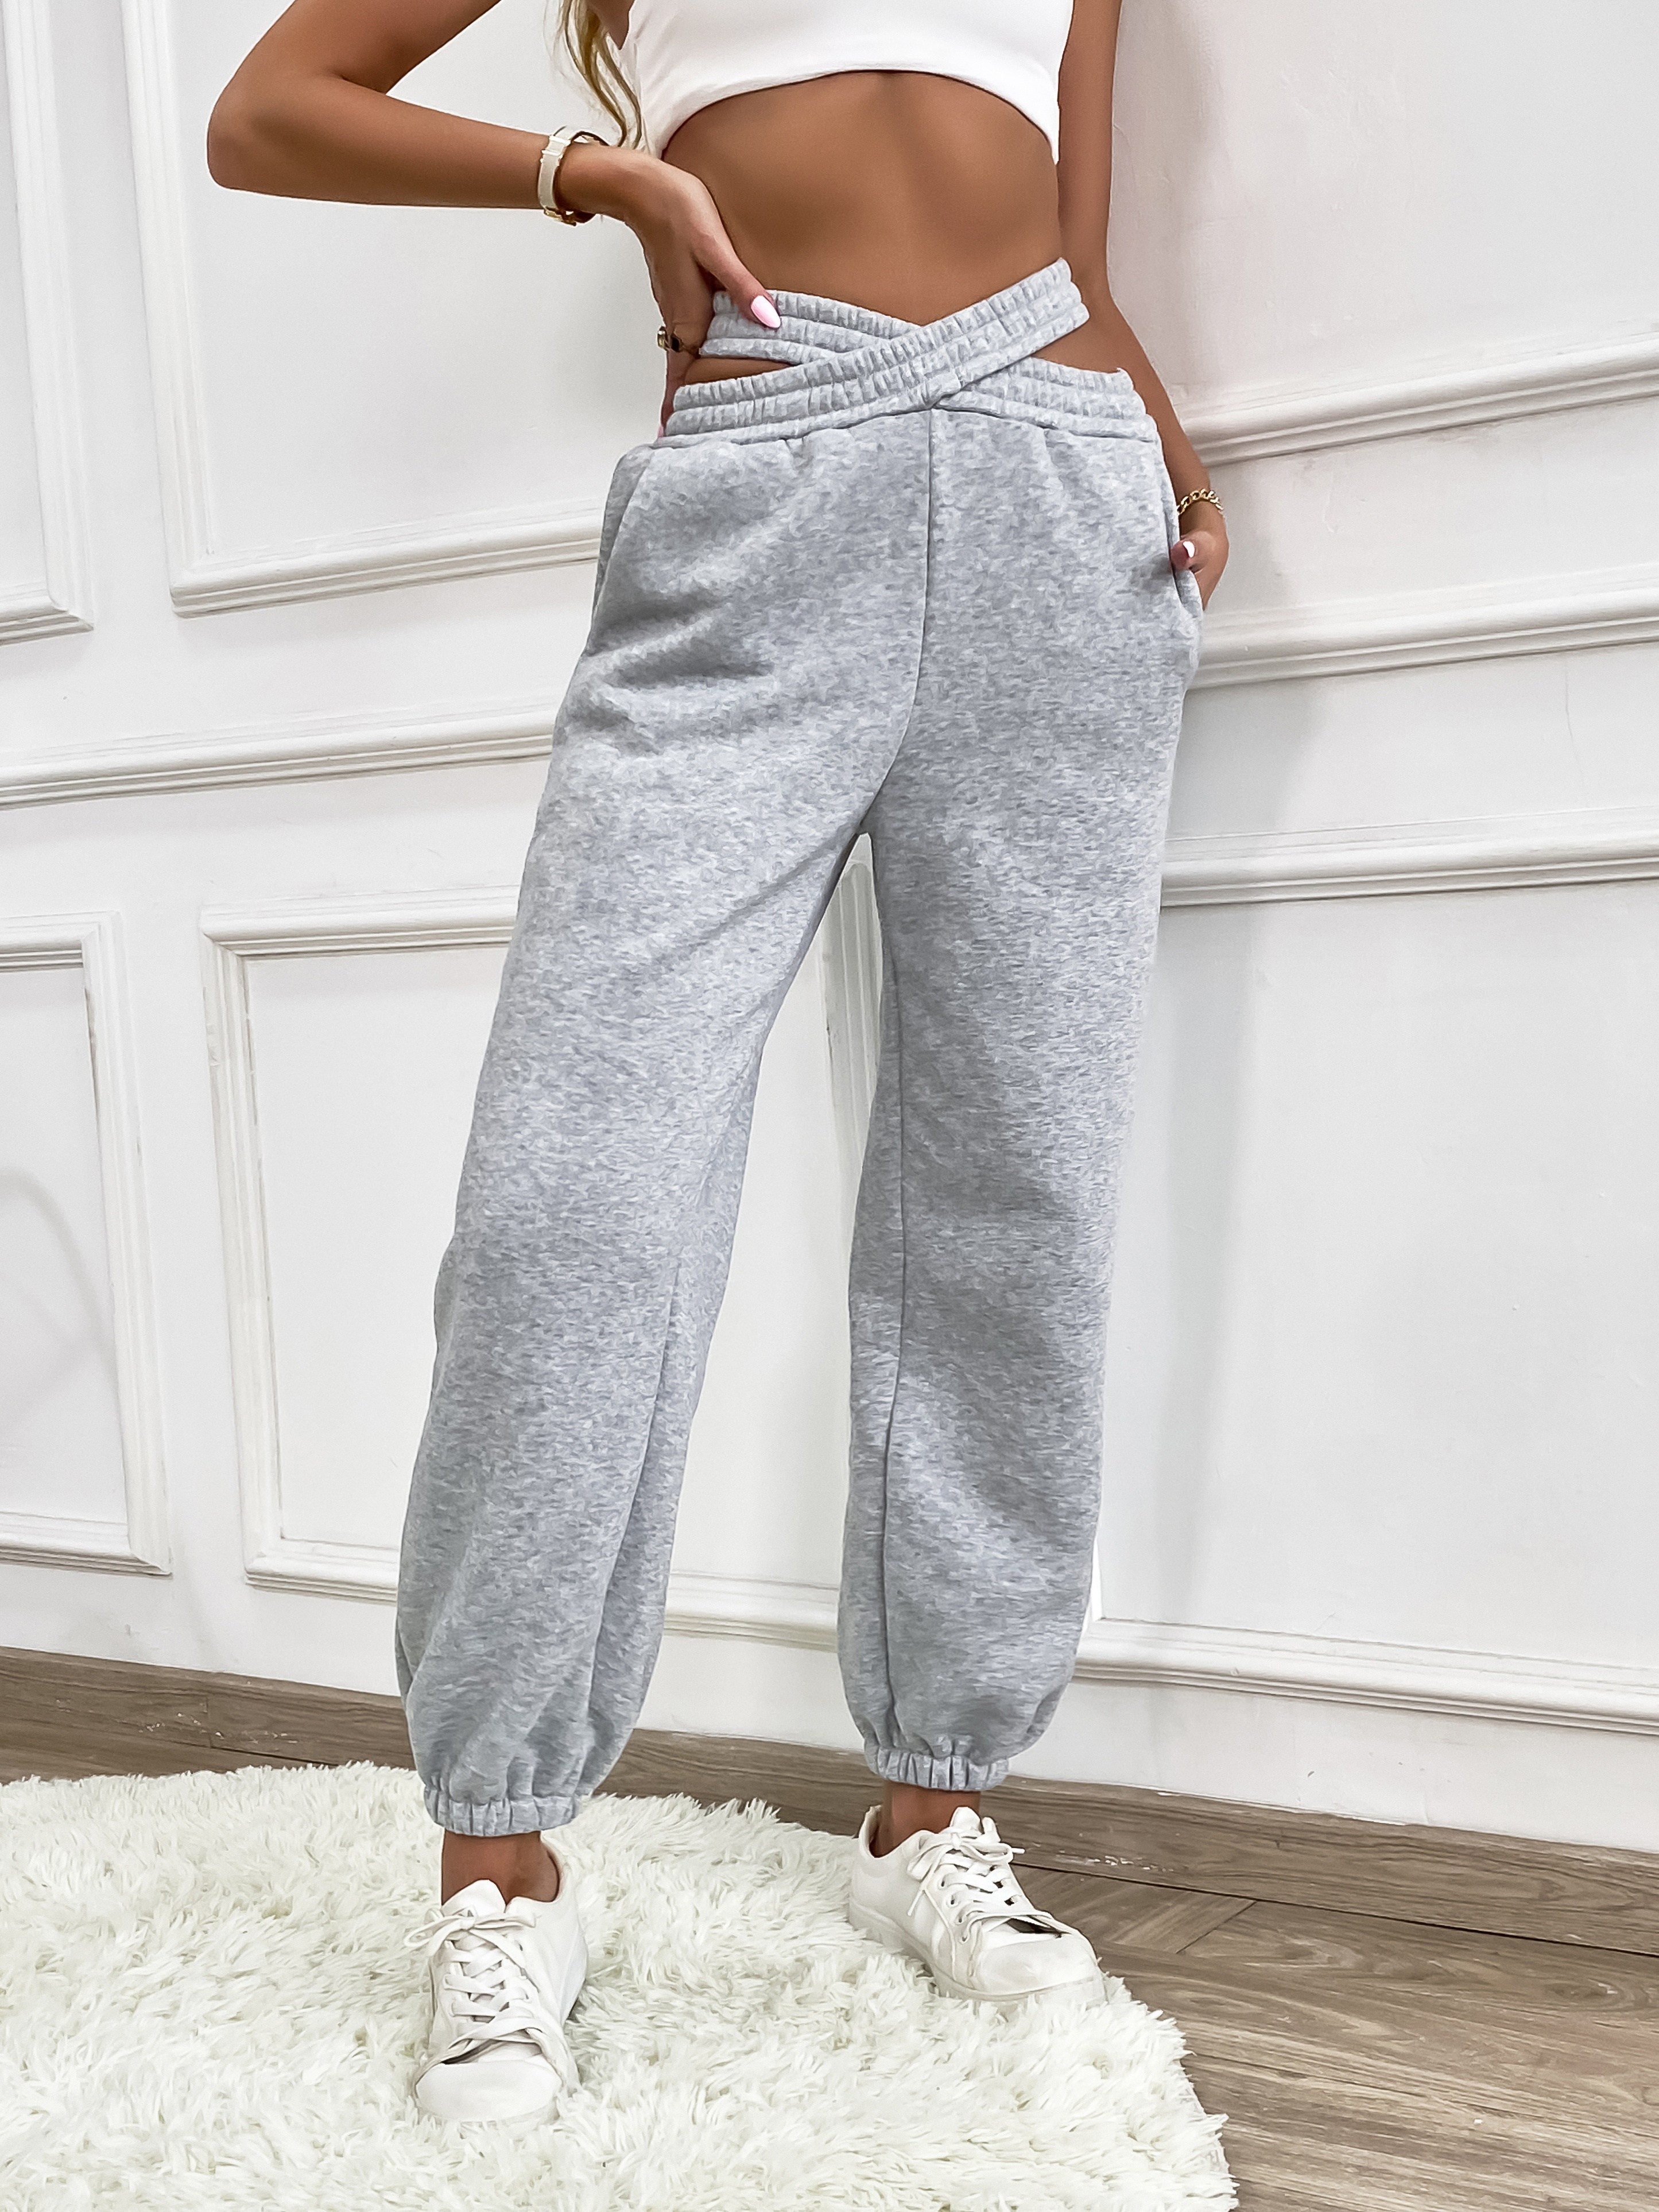 Women's Joggers - Solid